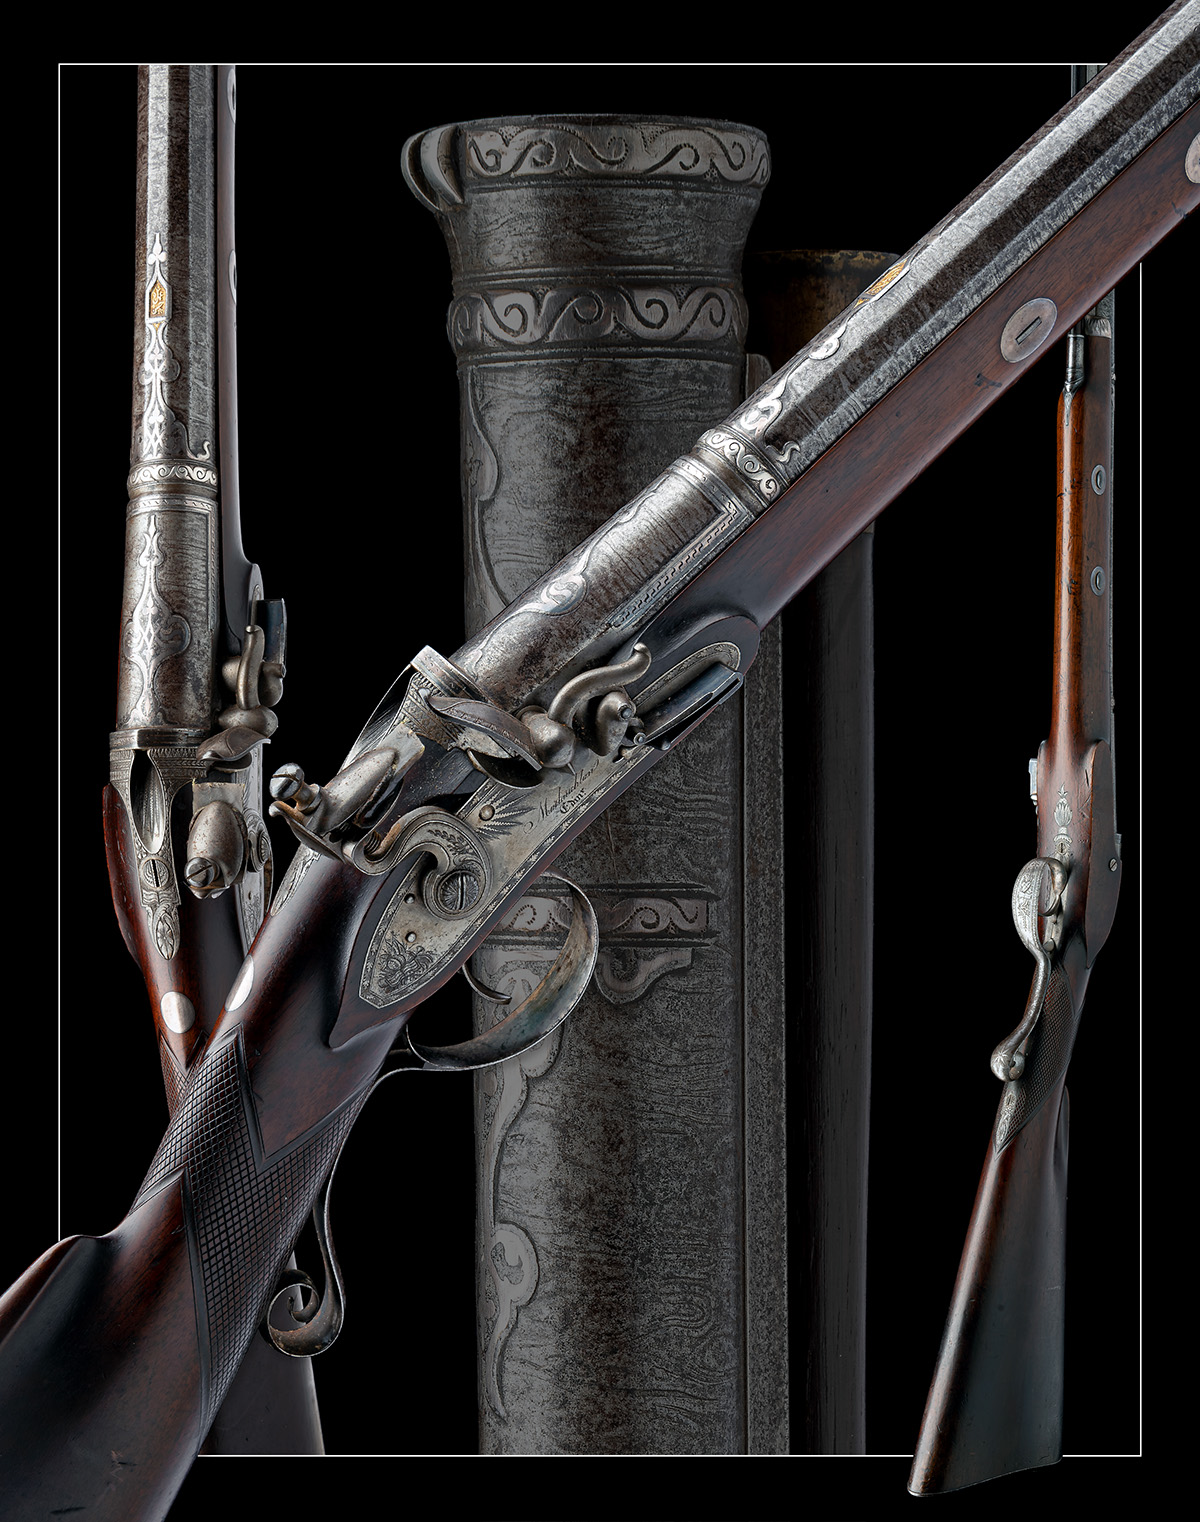 A FINE 10-BORE FLINTLOCK SPORTING MUSKET SIGNED MACLAUCHLAN, EDINBURGH, WITH INLAID TURKISH - Image 10 of 10